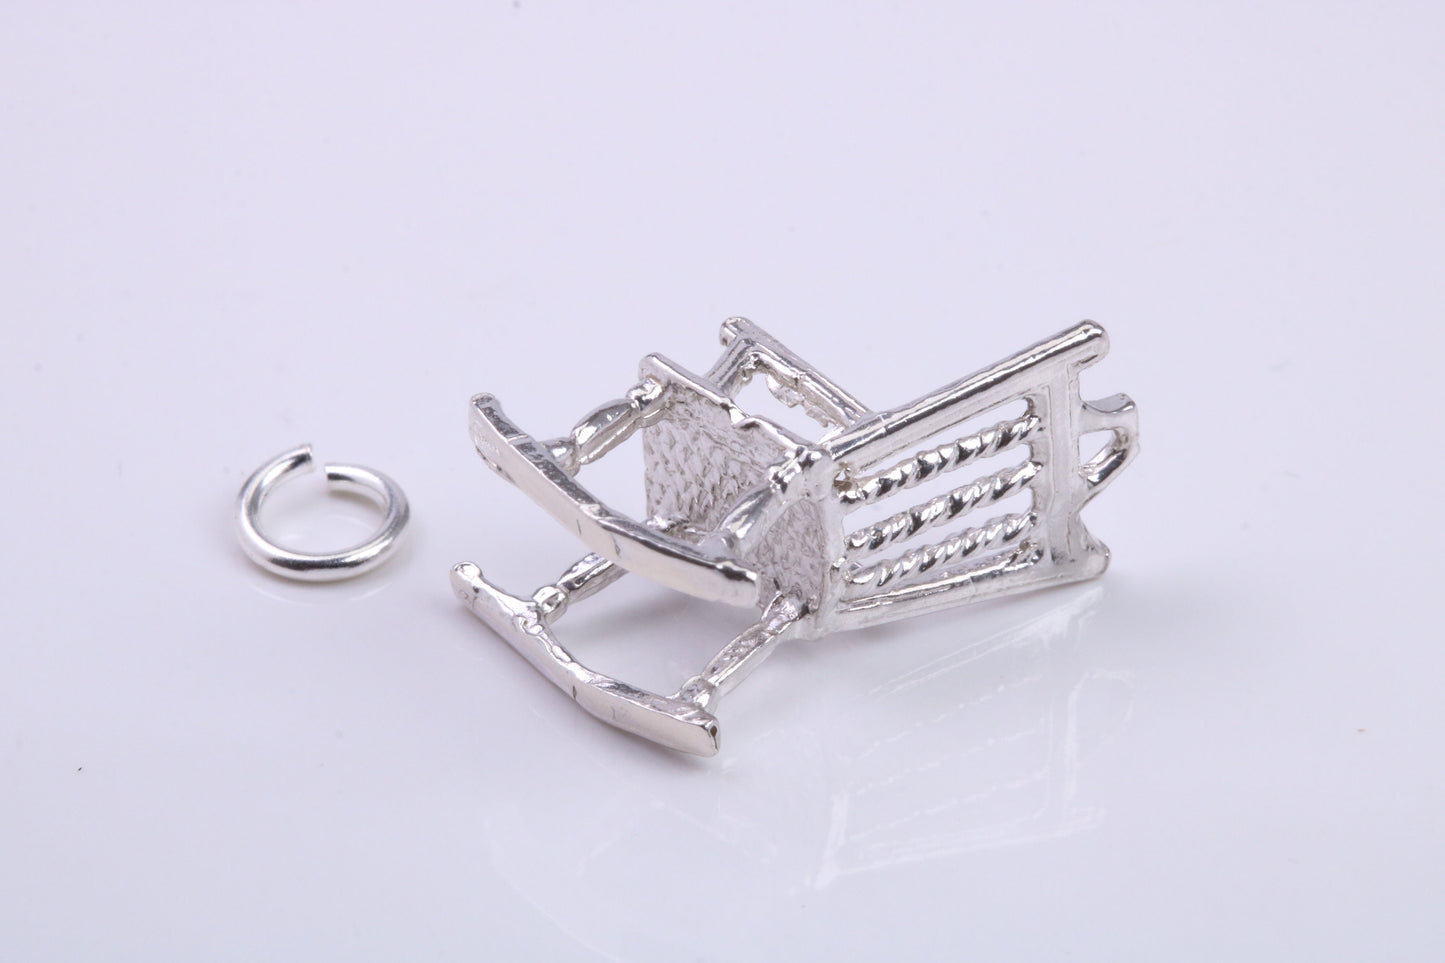 Rocking Chair Charm, Traditional Charm, Made from Solid 925 Grade Sterling Silver, Complete with Attachment Link